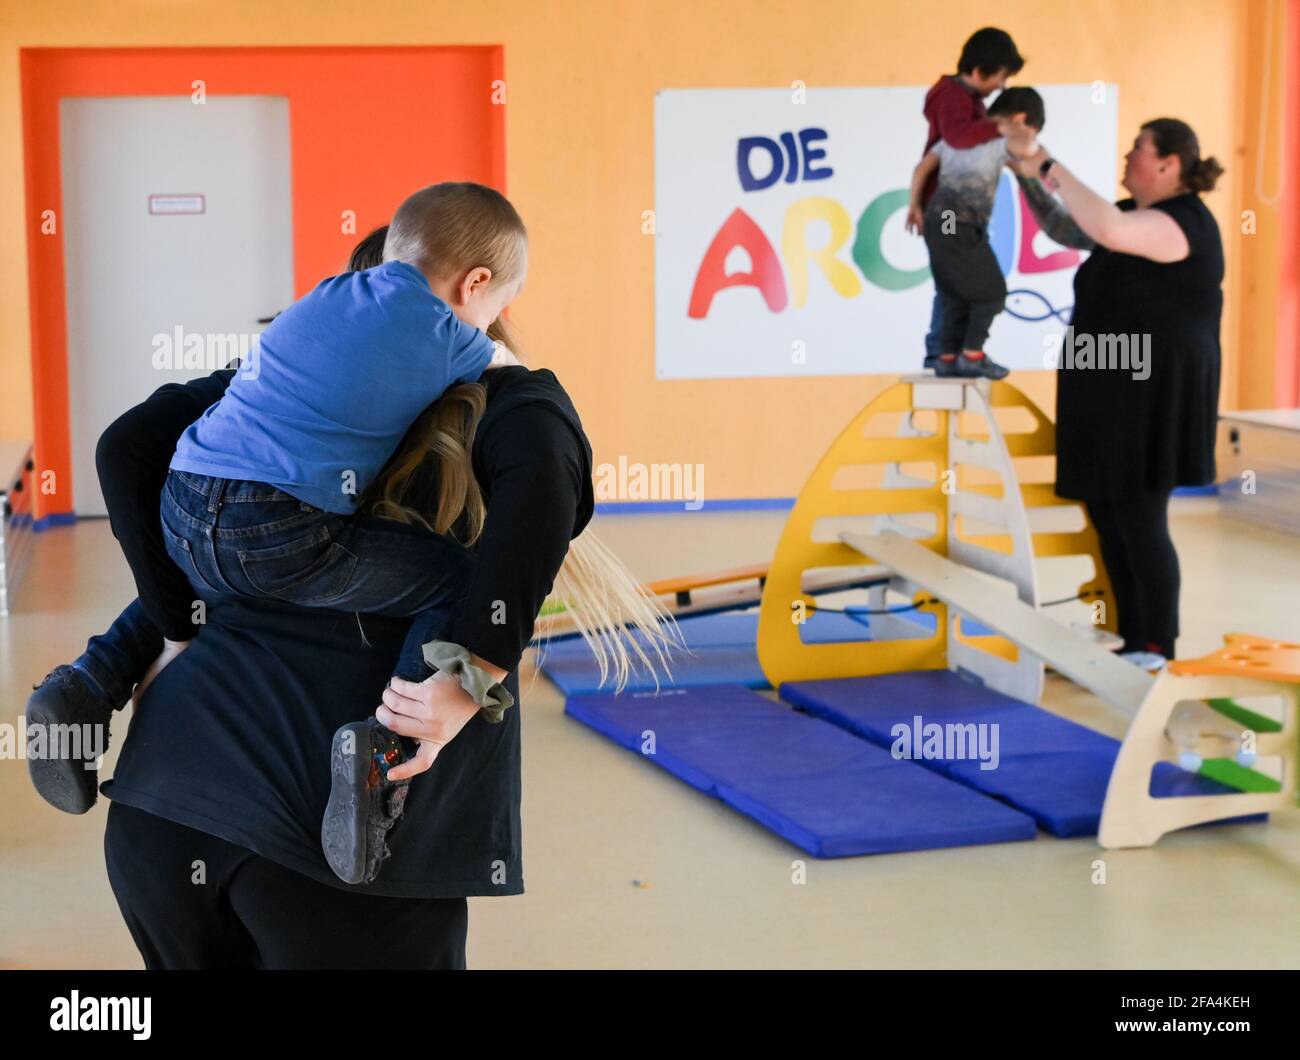 Berlin, Germany. 21st Apr, 2021. Children are looked after during leisure time care at the Arche in Hellersdorf. The association 'Die Arche Christliches Kinder- und Jugendwerk' runs leisure facilities and school care for socially disadvantaged children. Credit: Jens Kalaene/dpa-Zentralbild/dpa/Alamy Live News Stock Photo